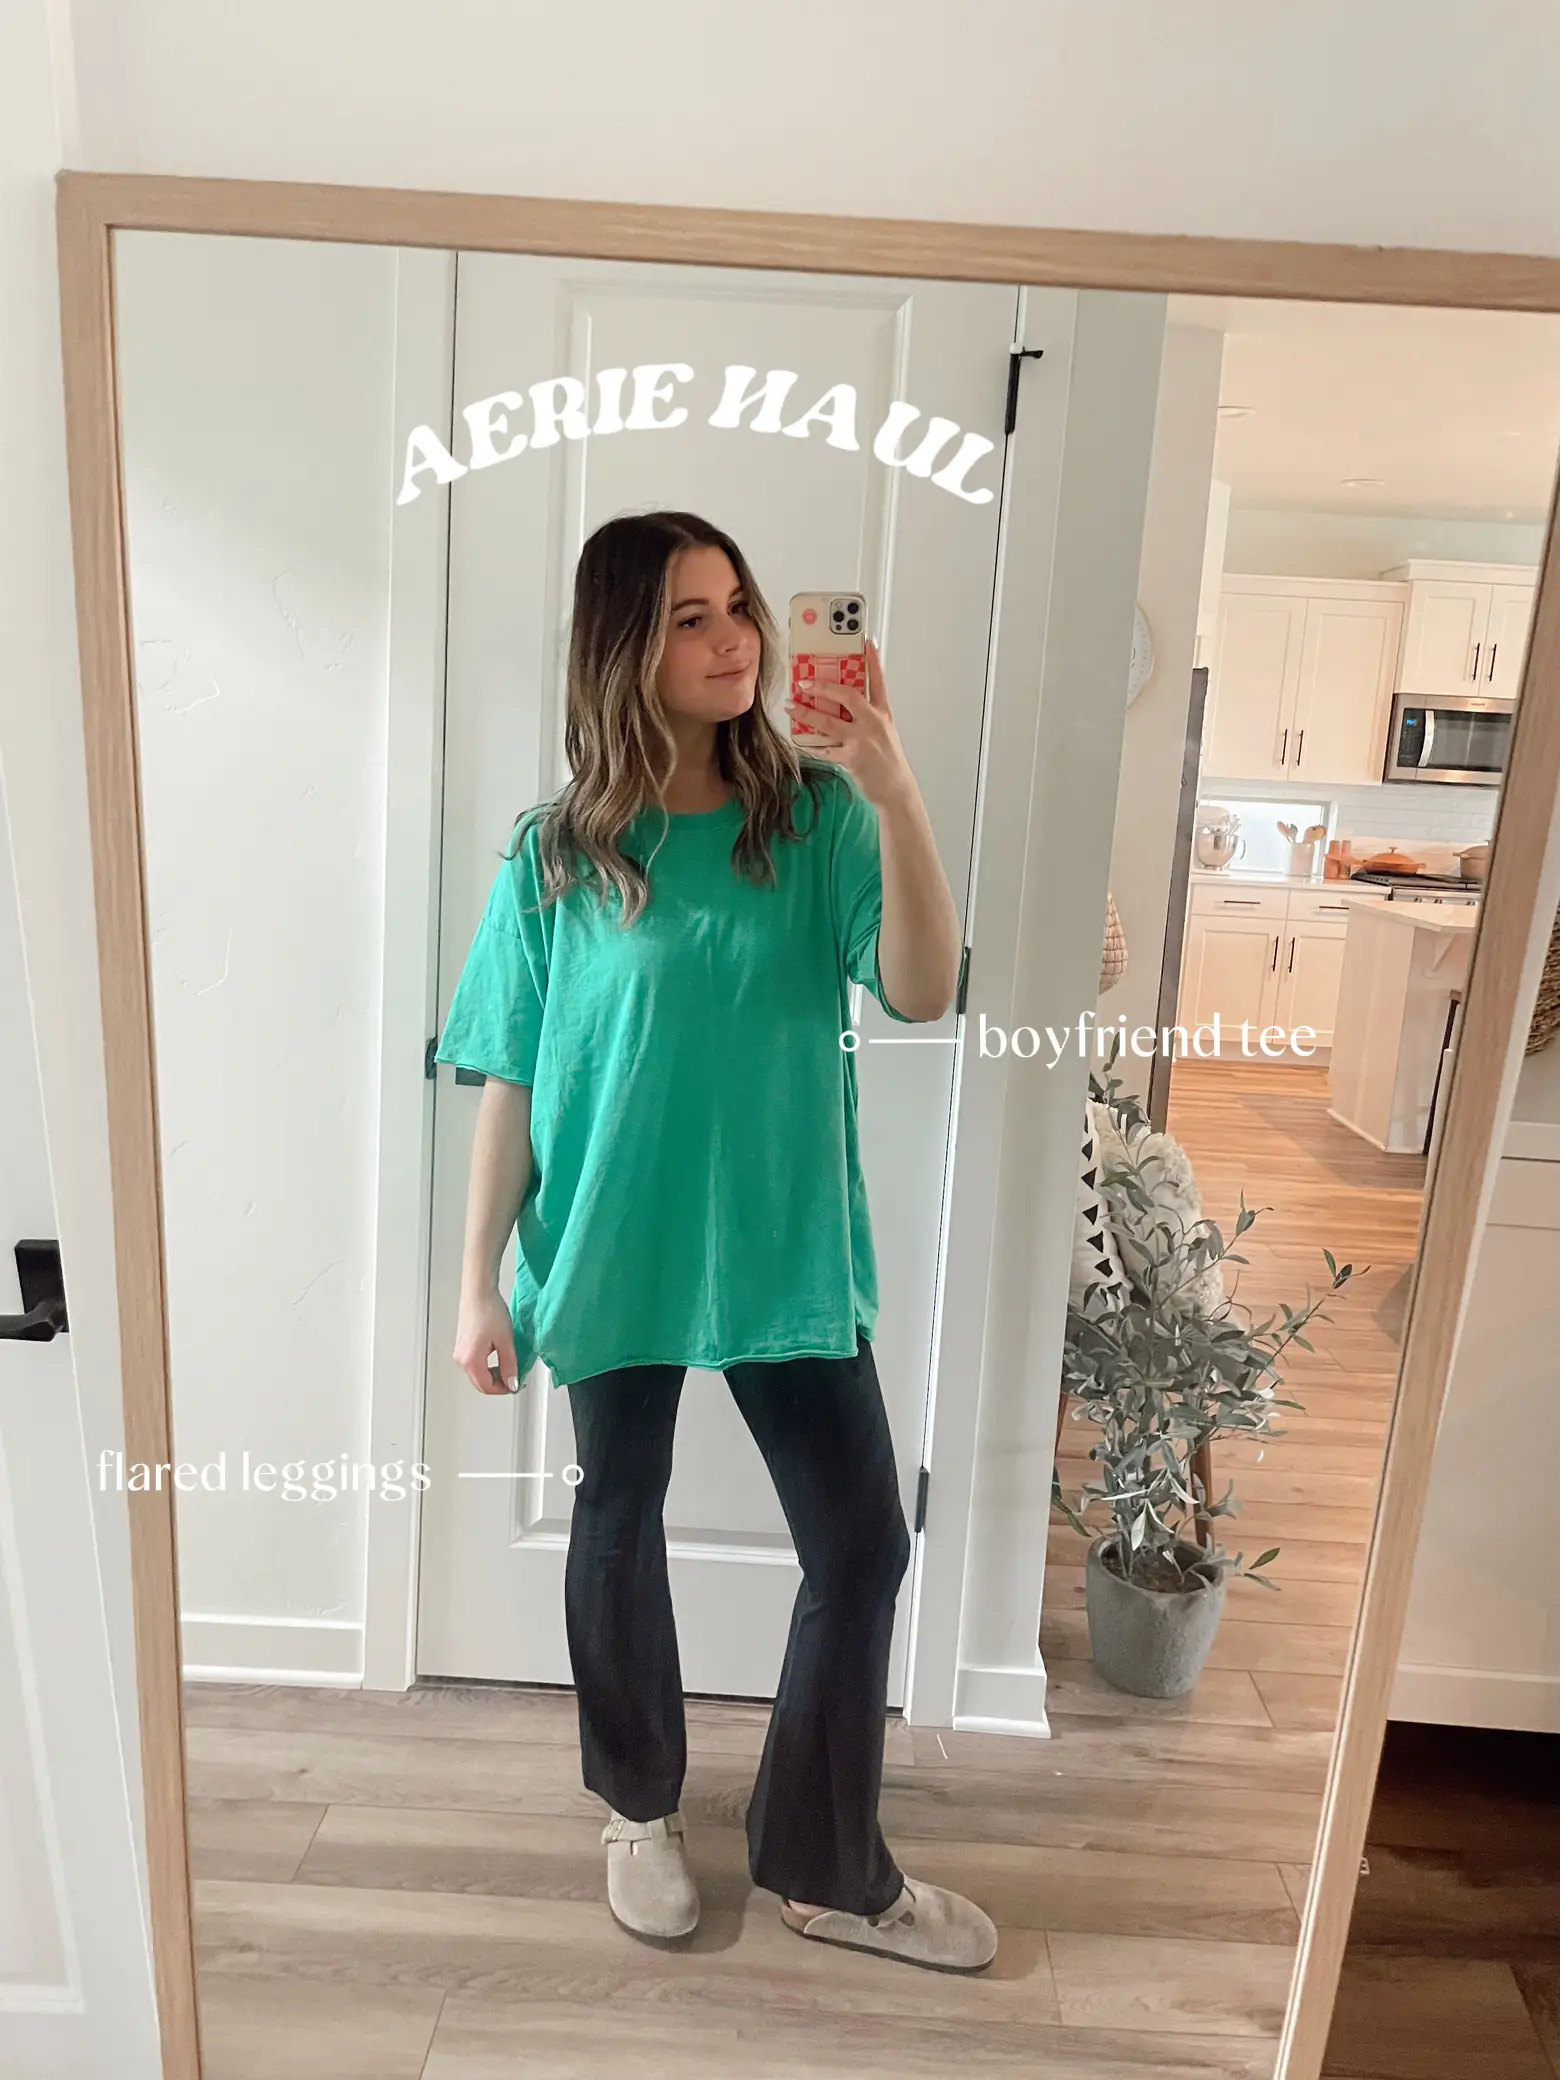 Some cute new arrivals from aerie!, Gallery posted by Annie Paventy